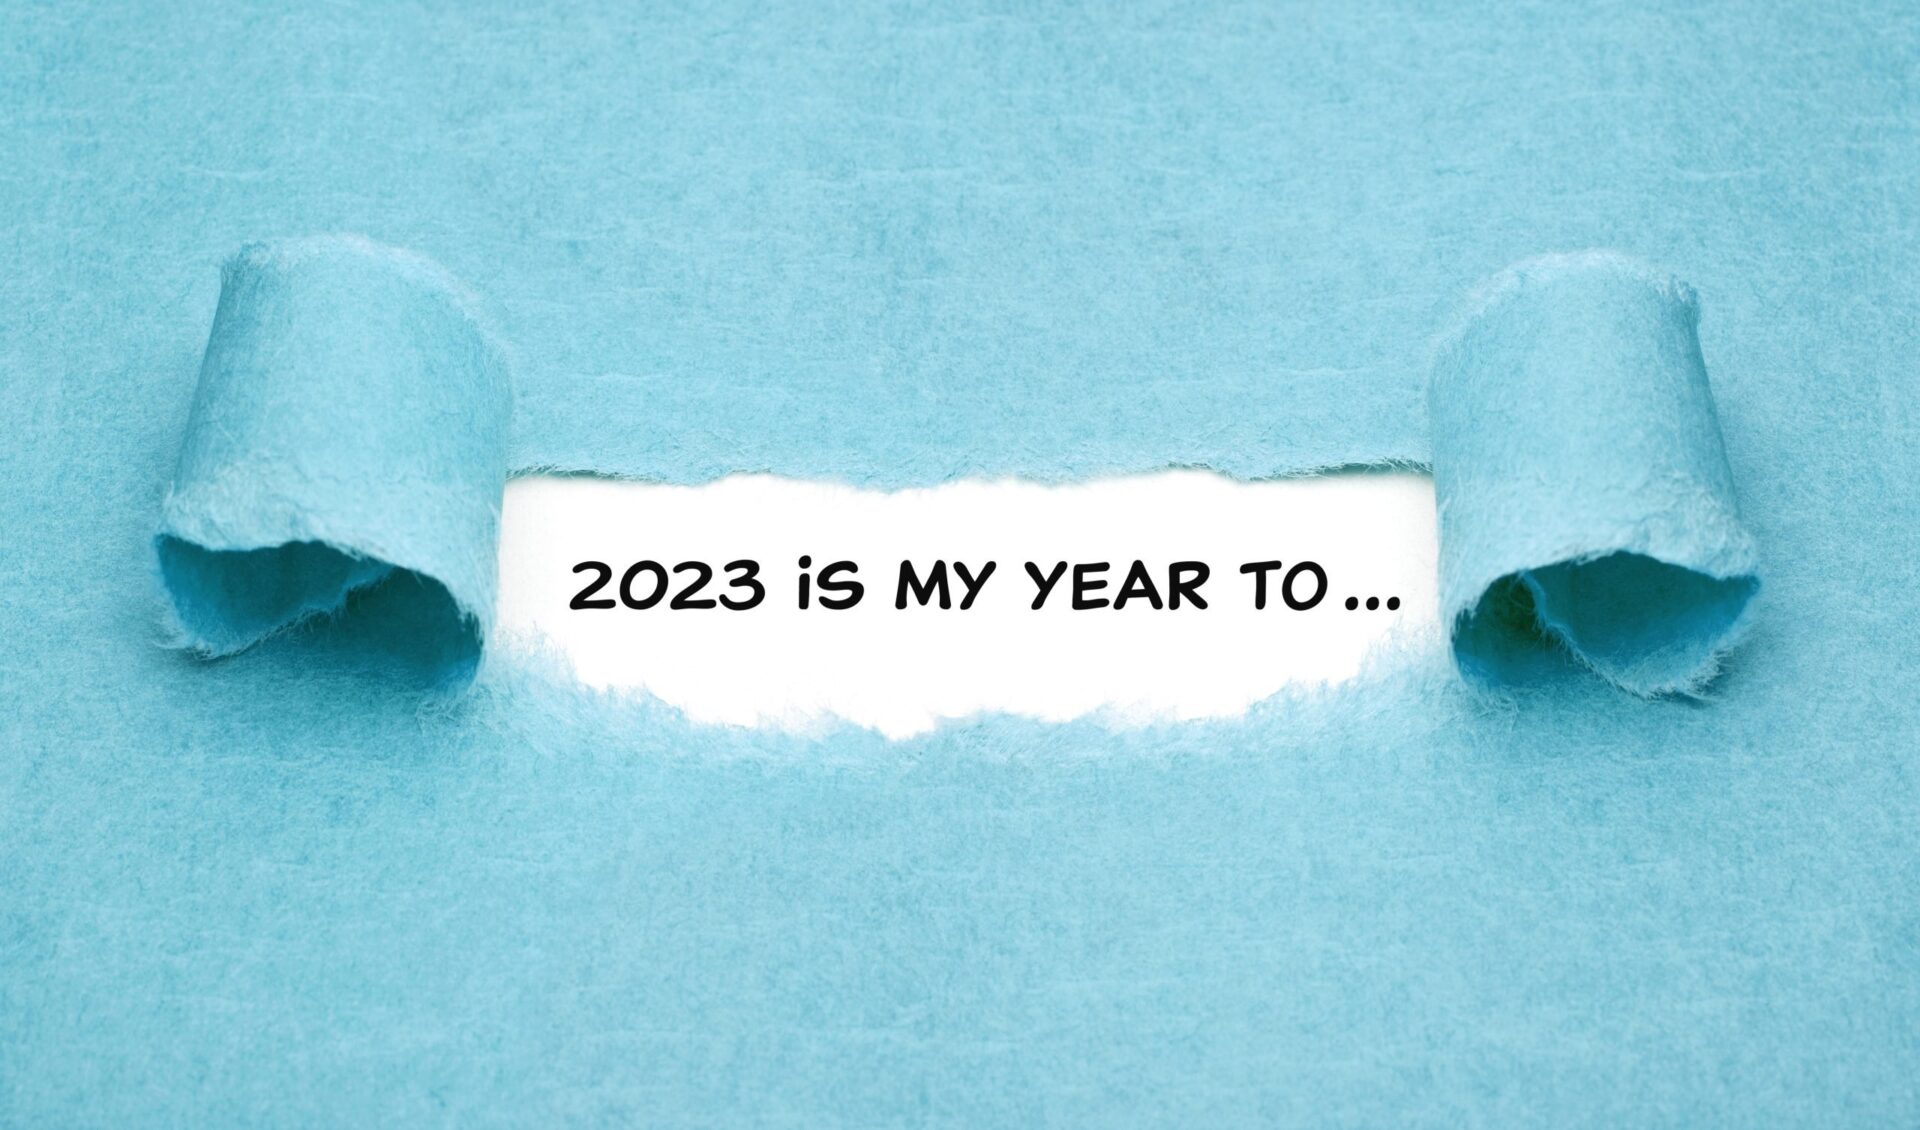 Photo of message that says 2023 is my year to